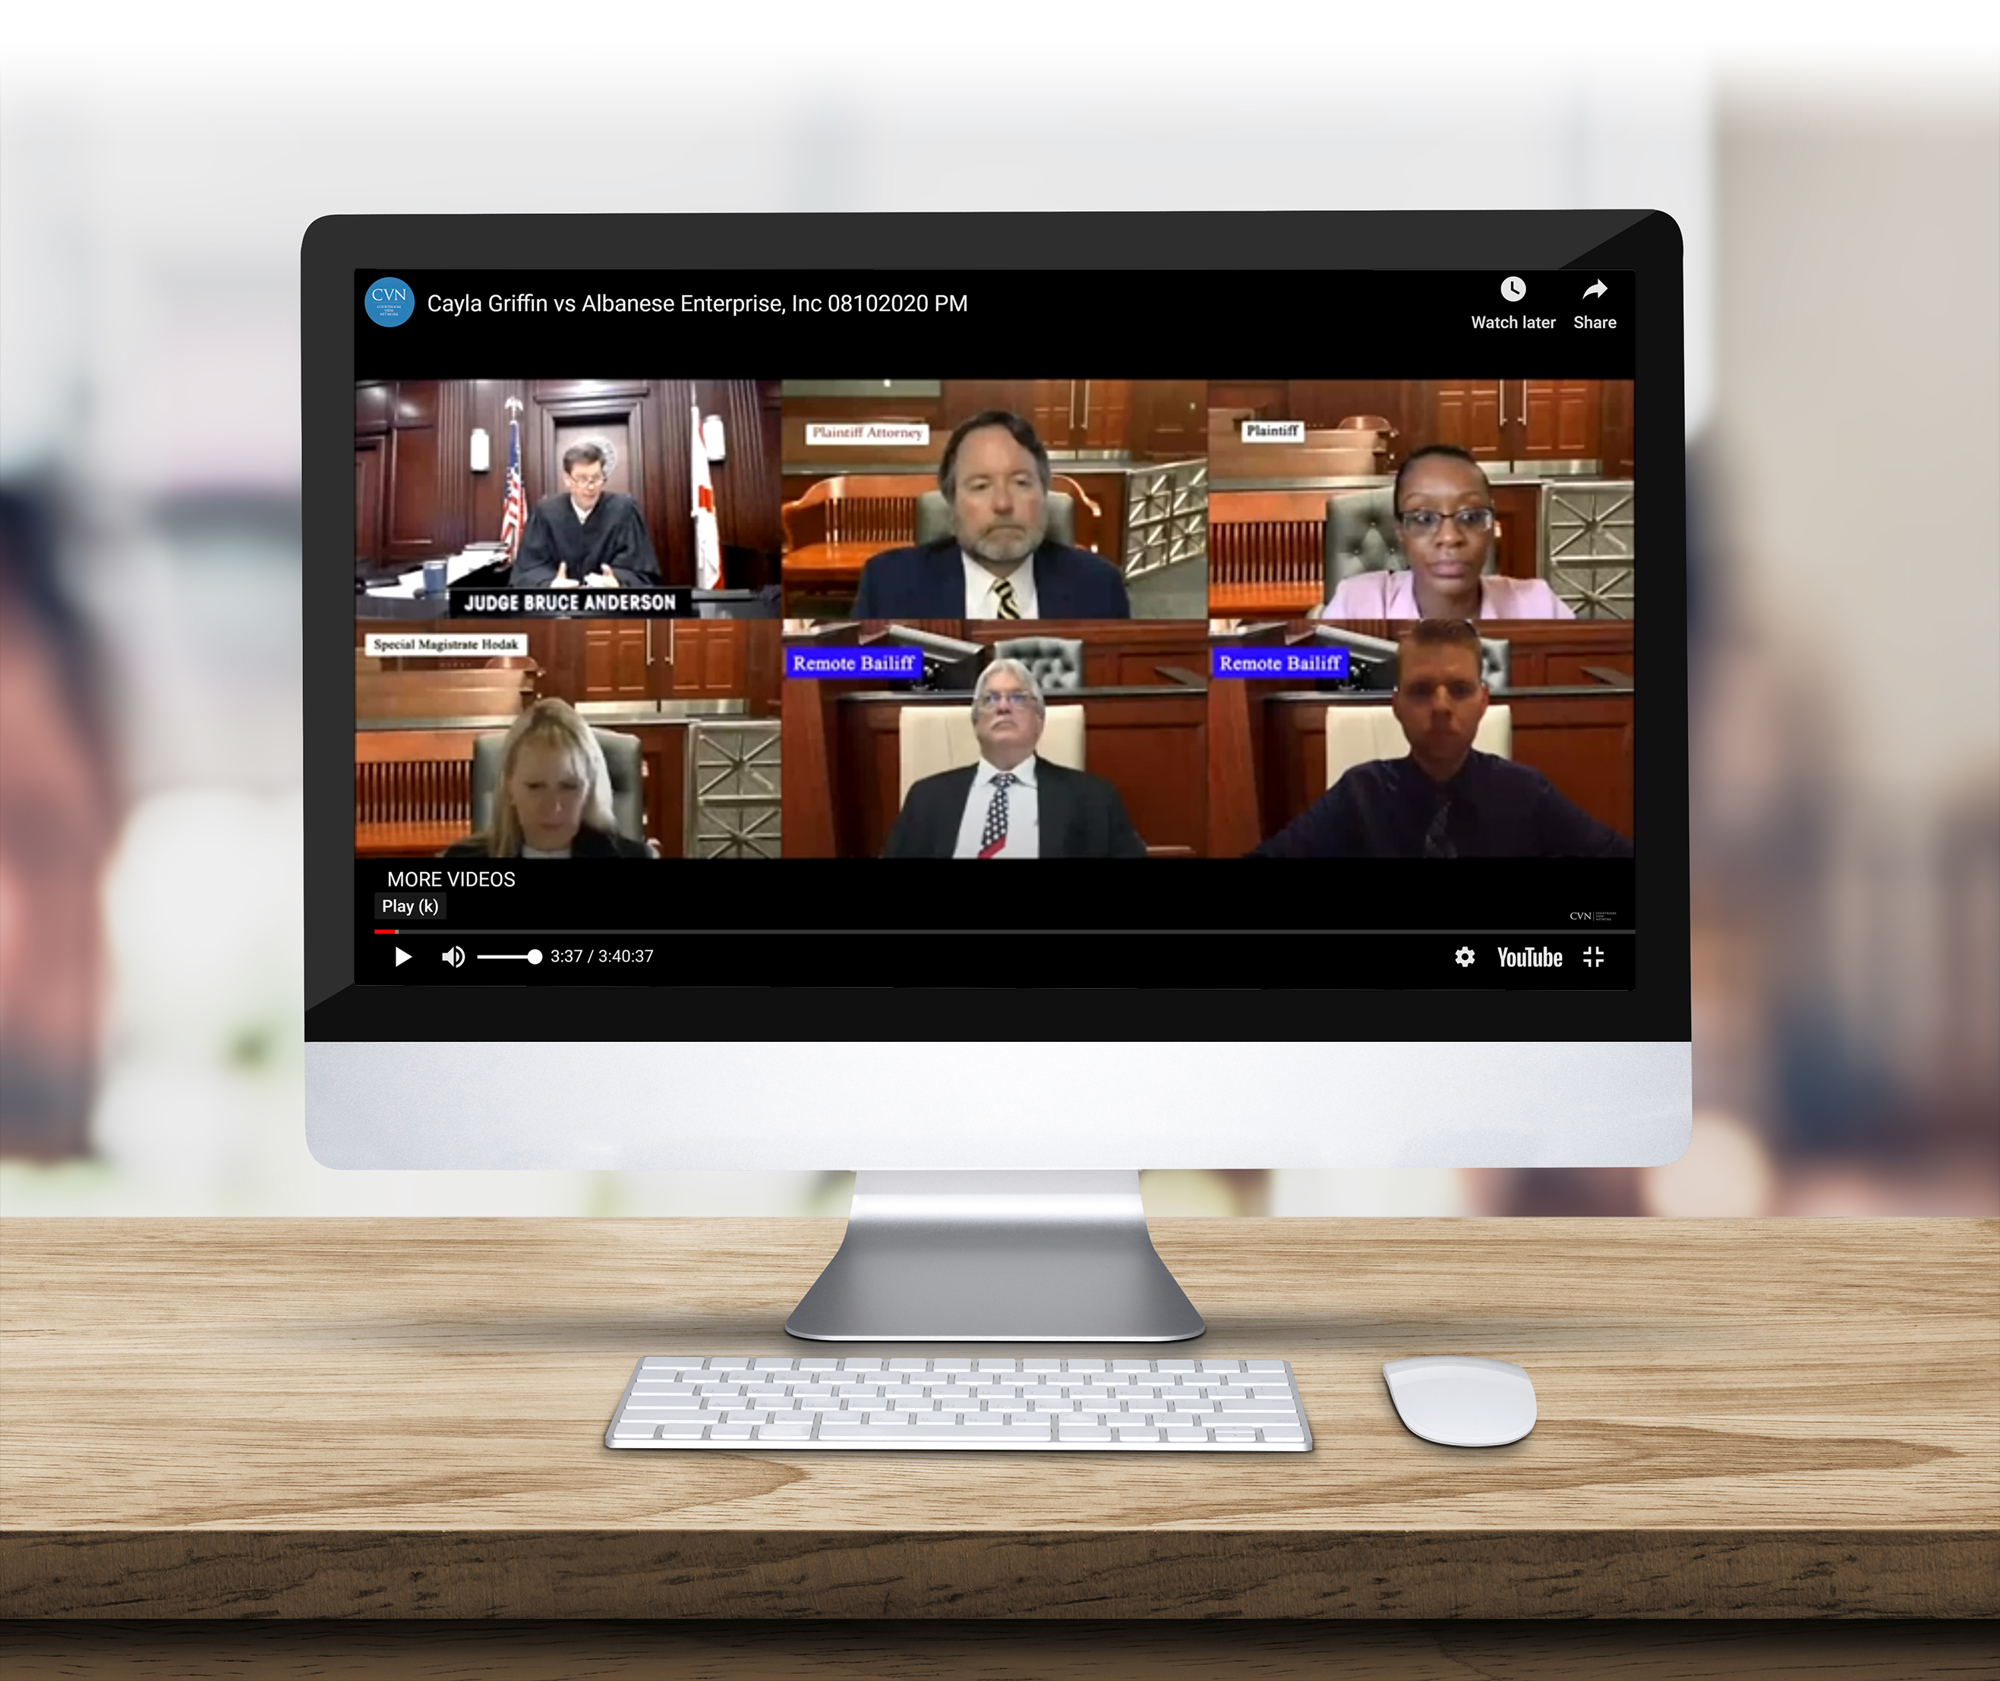 The judge, plaintiff’s attorney, plaintiff, special magistrate and two remote bailiffs take part in the virtual trial. Only the judge is in the Duval County Courthouse, the rest of the backgrounds are simulated.